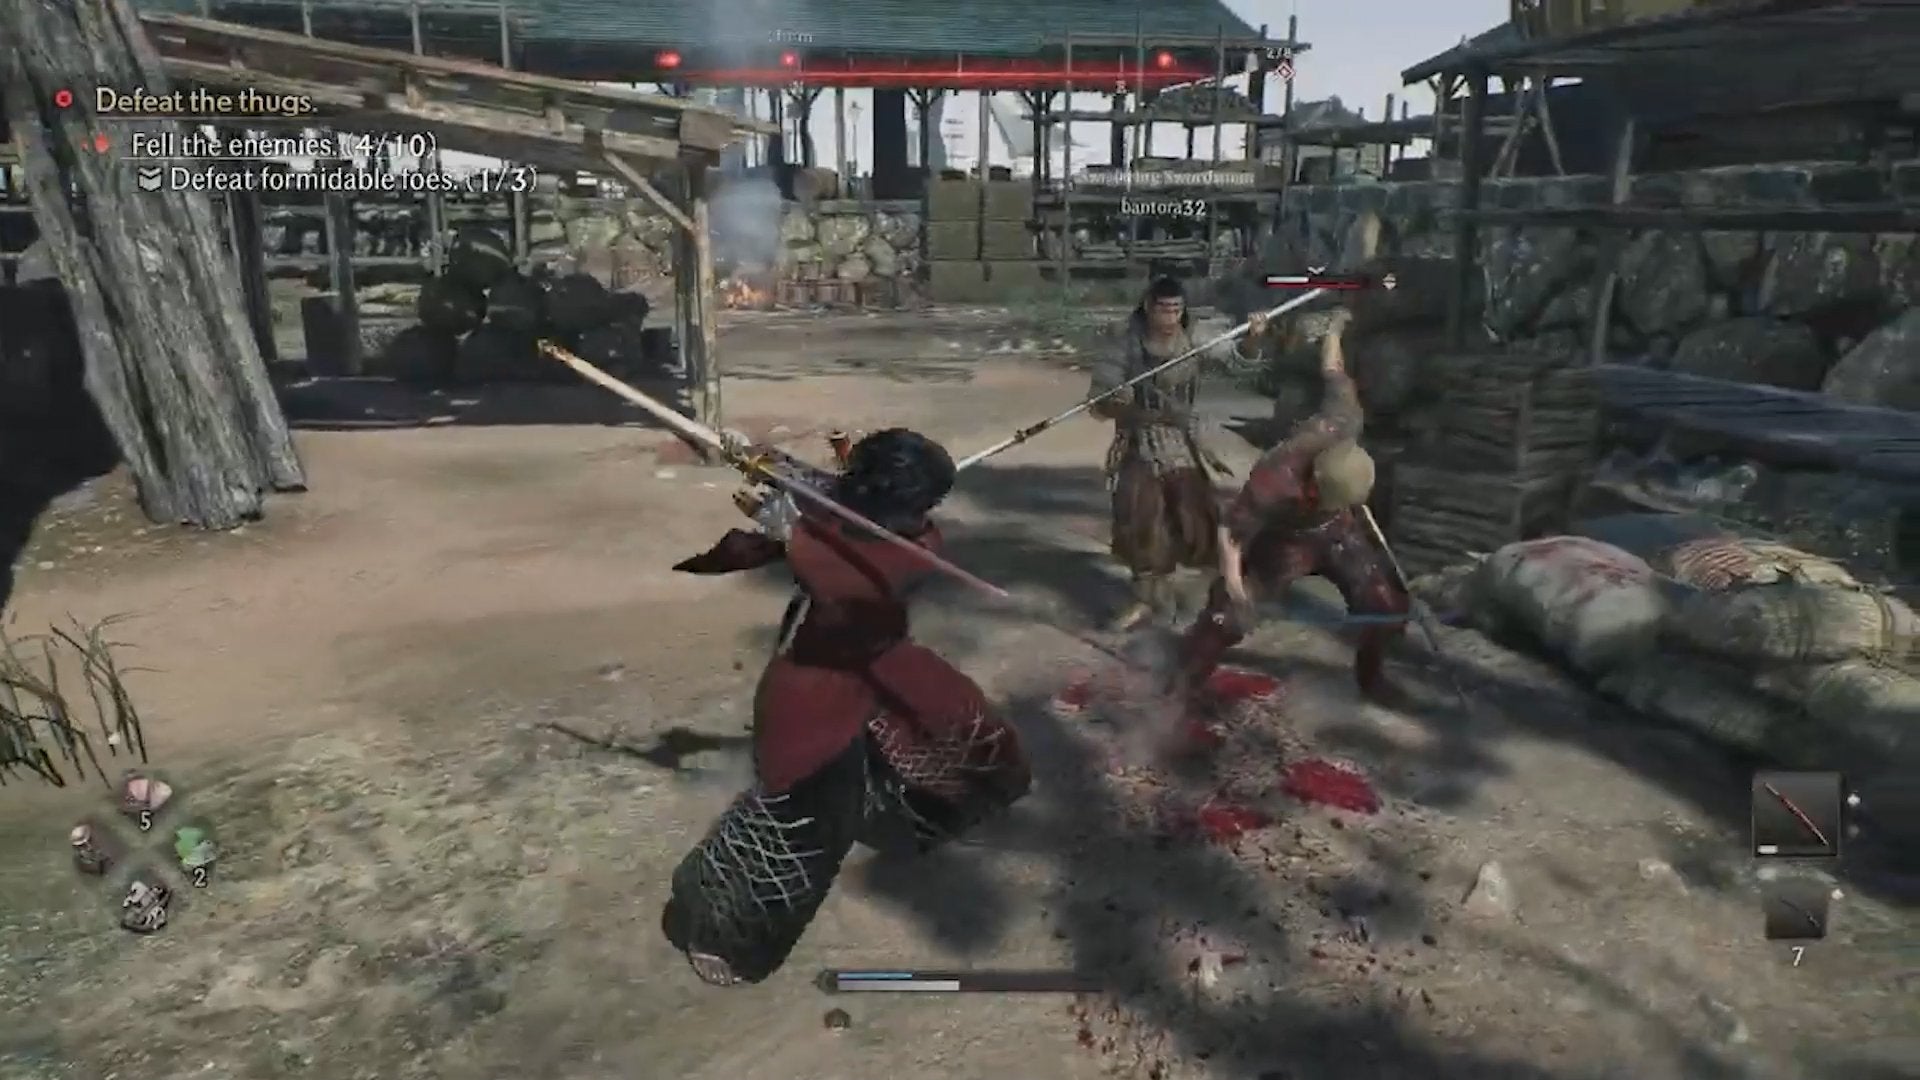 The player fighting enemies in a harbor in Rise of the Ronin.